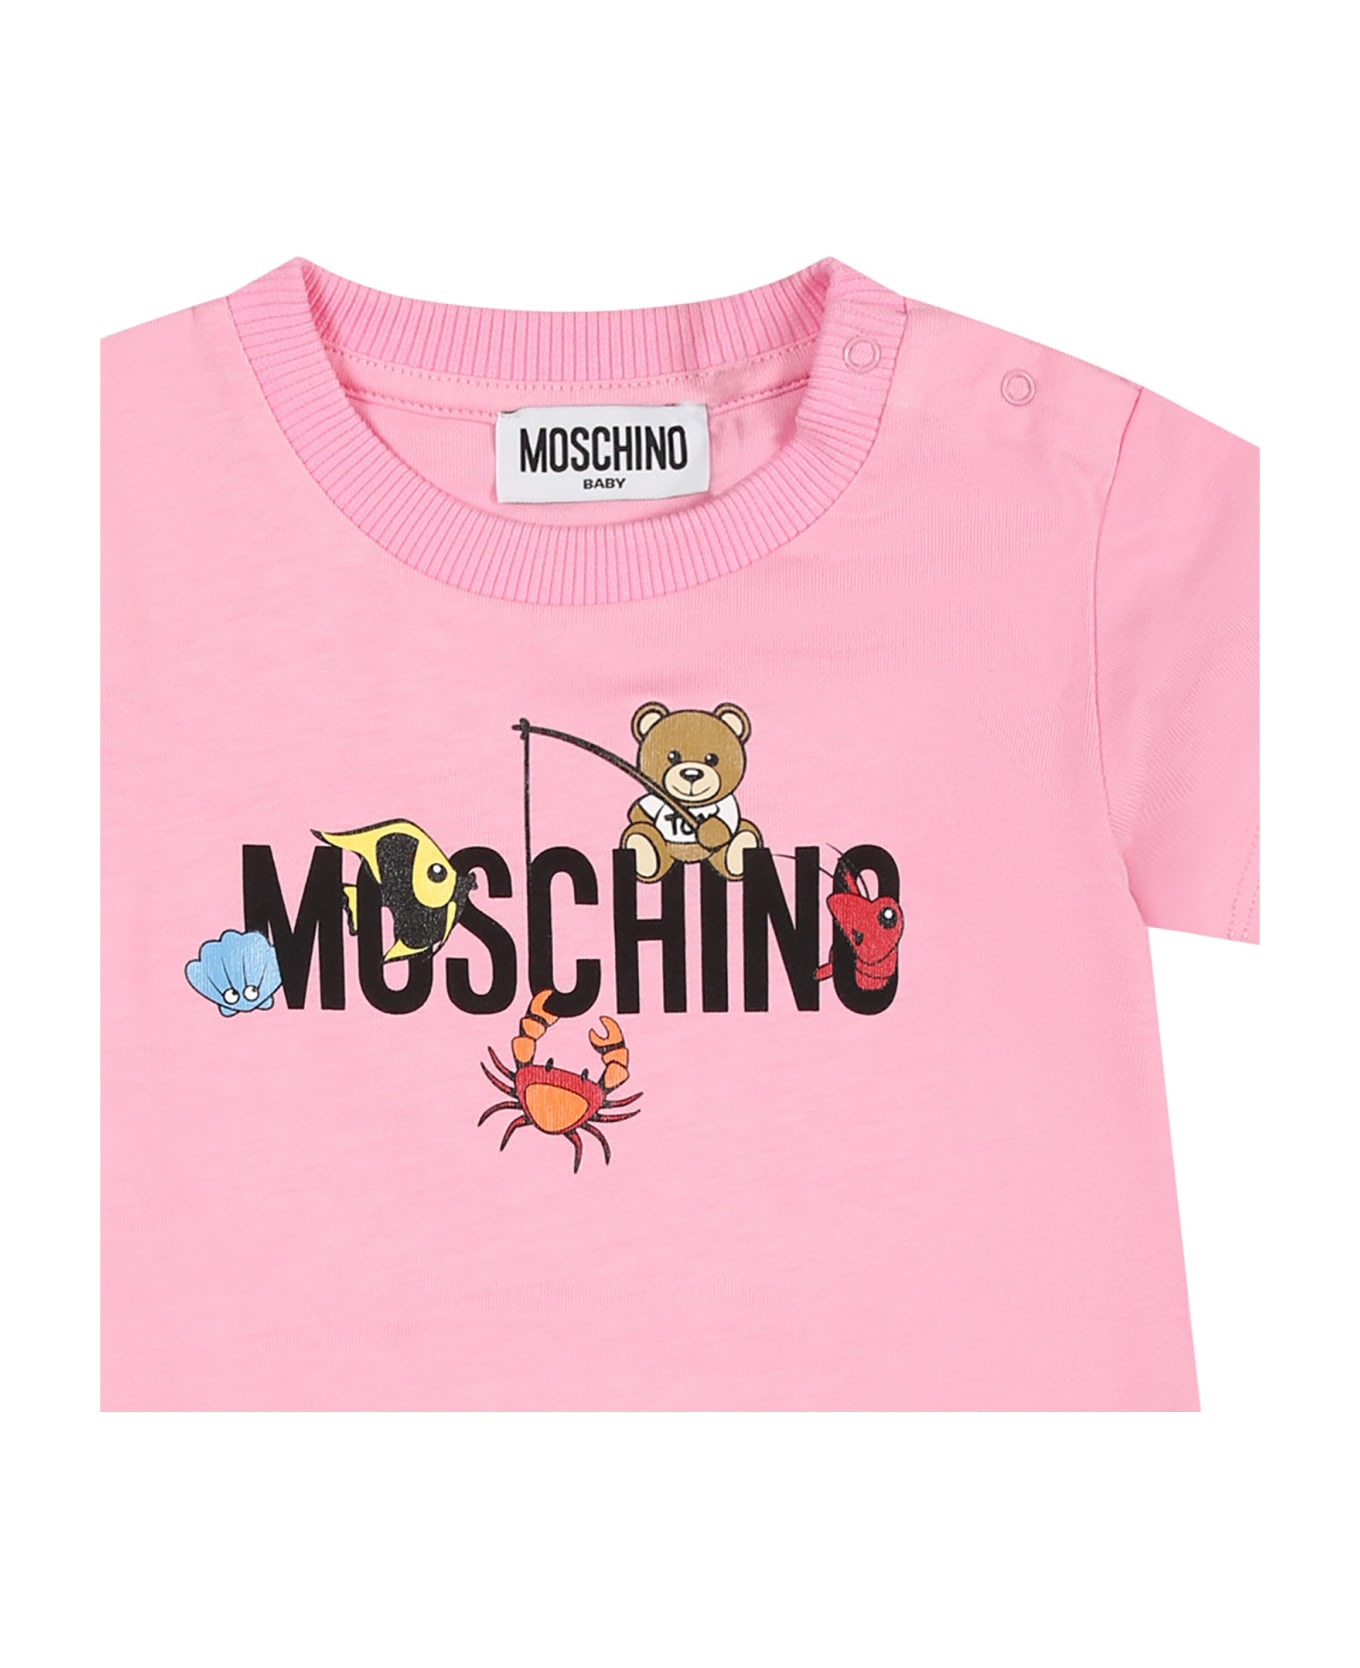 Moschino Pink Dress For Baby Girl With Logo And Animals - Pink